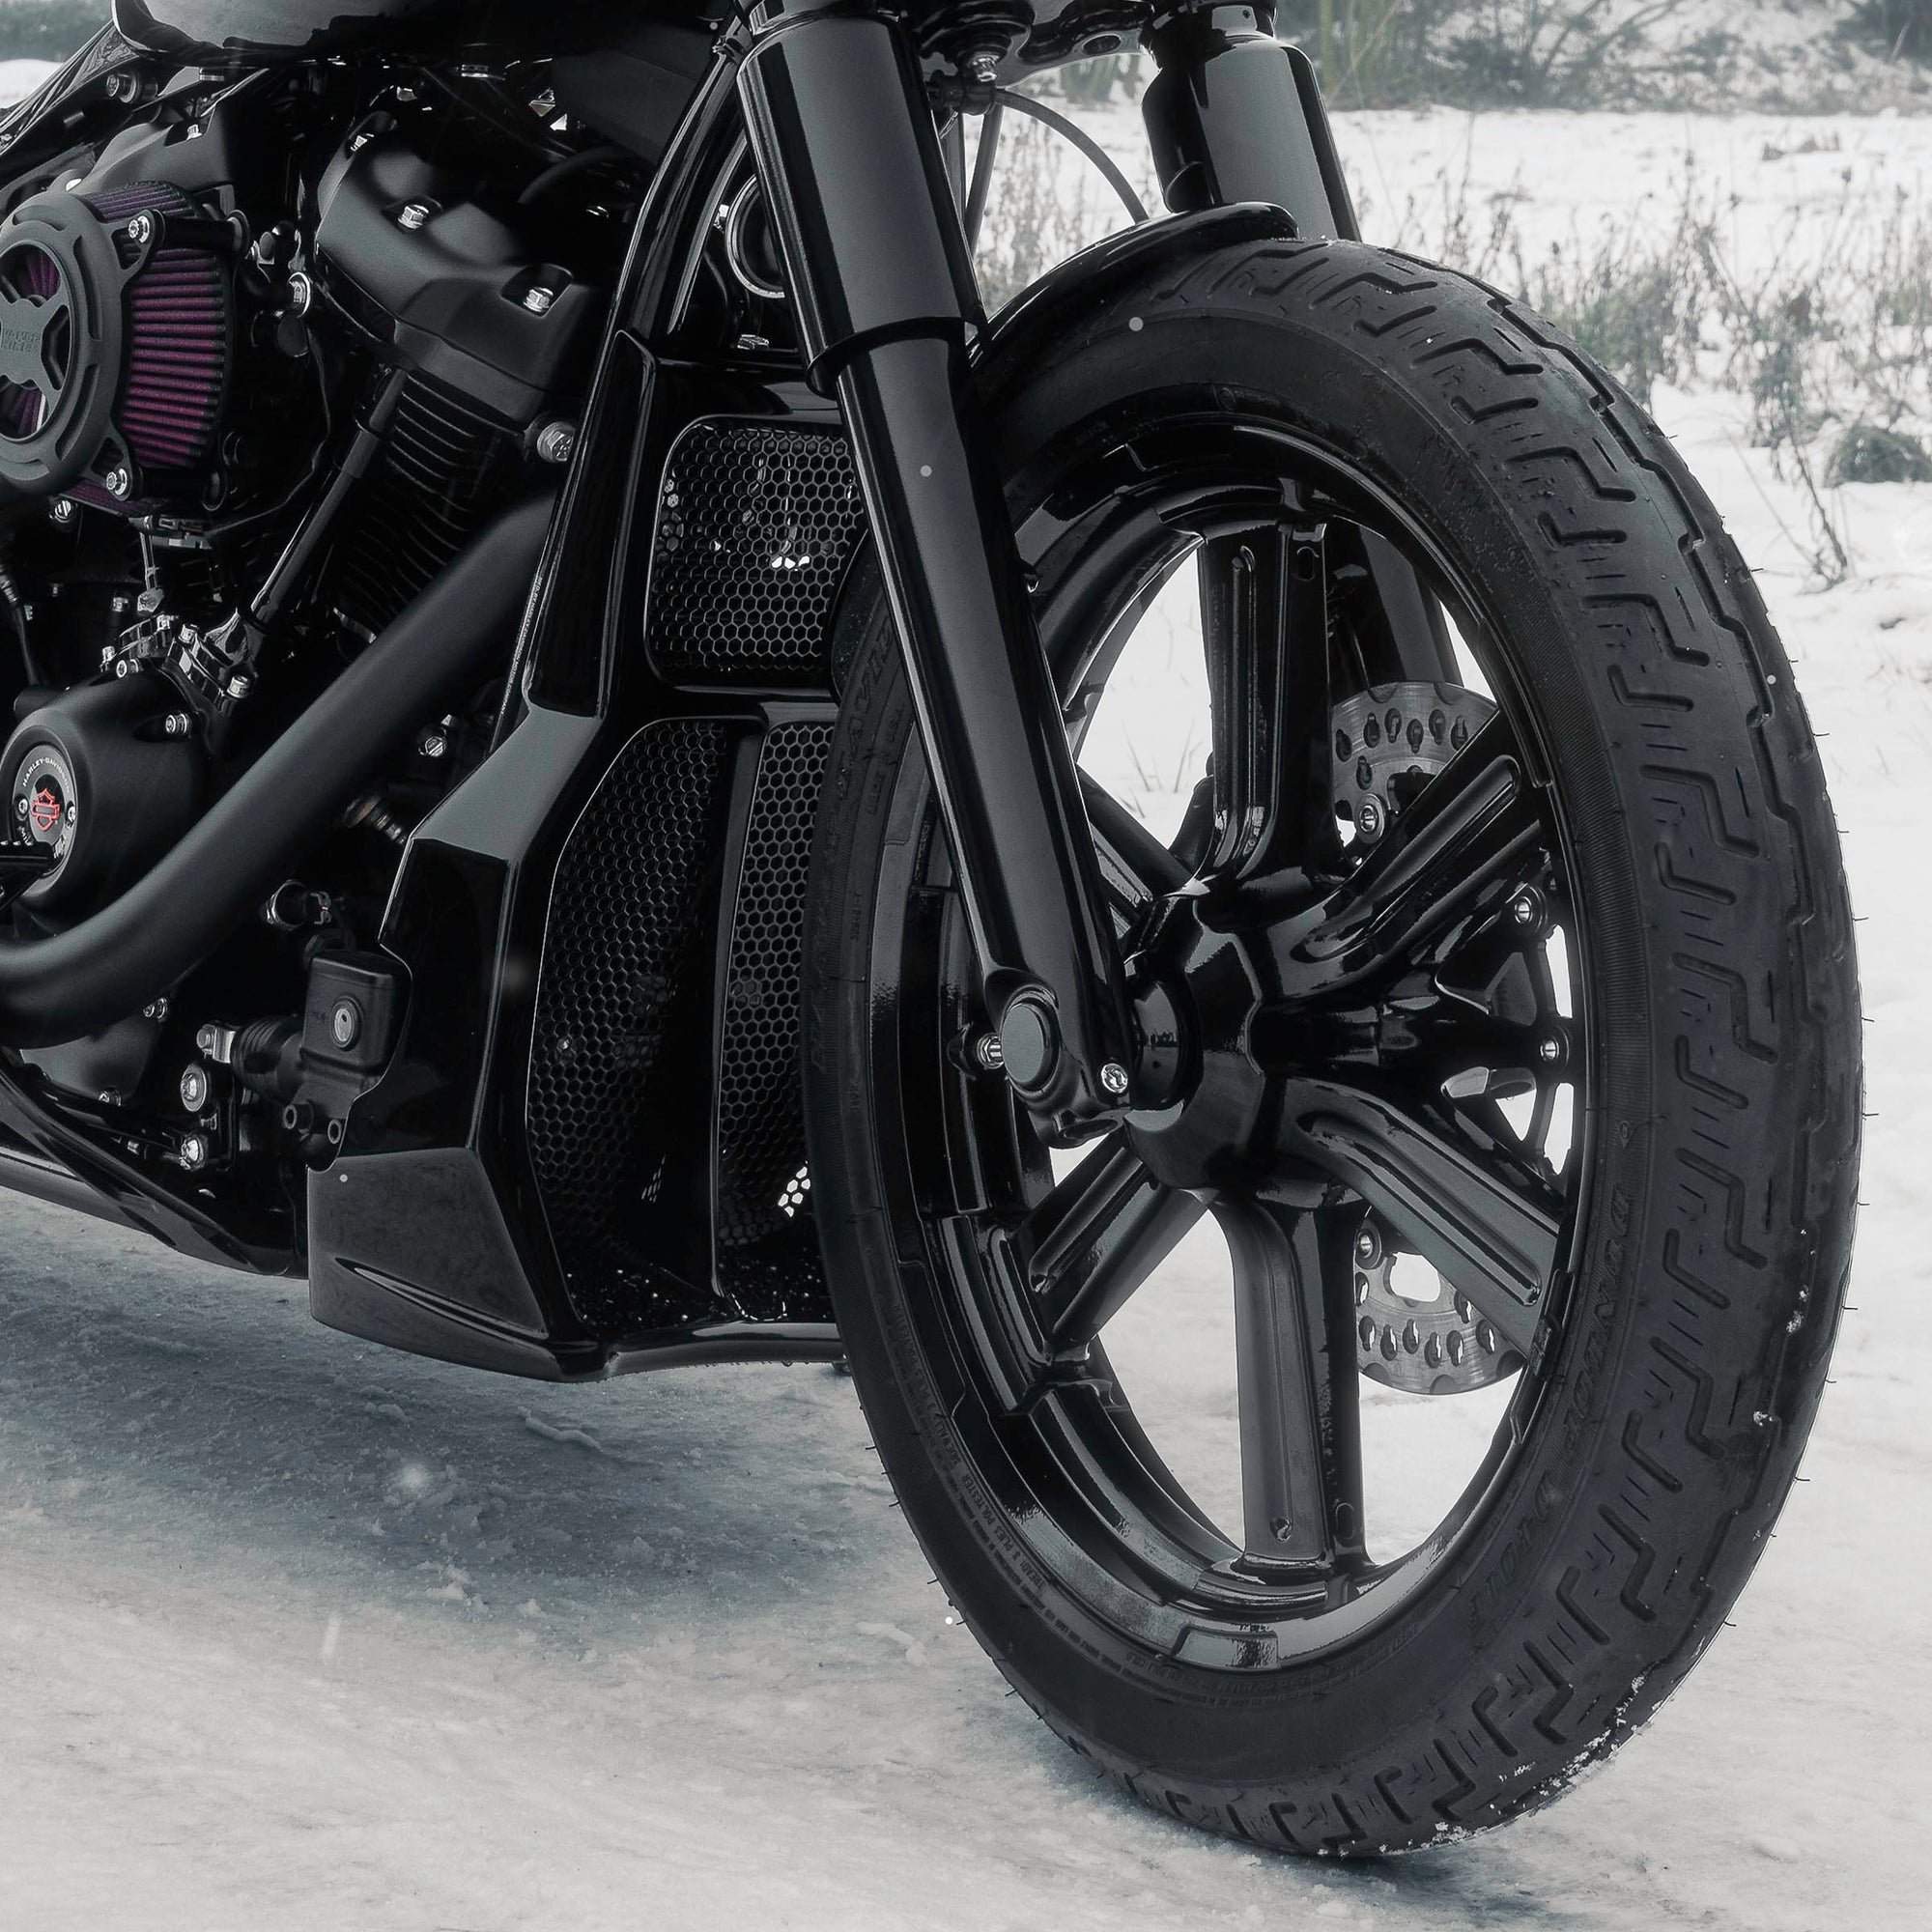 Zoomed Harley Davidson Softail motorcycle with Killer Custom parts from the front outside on a snowy day